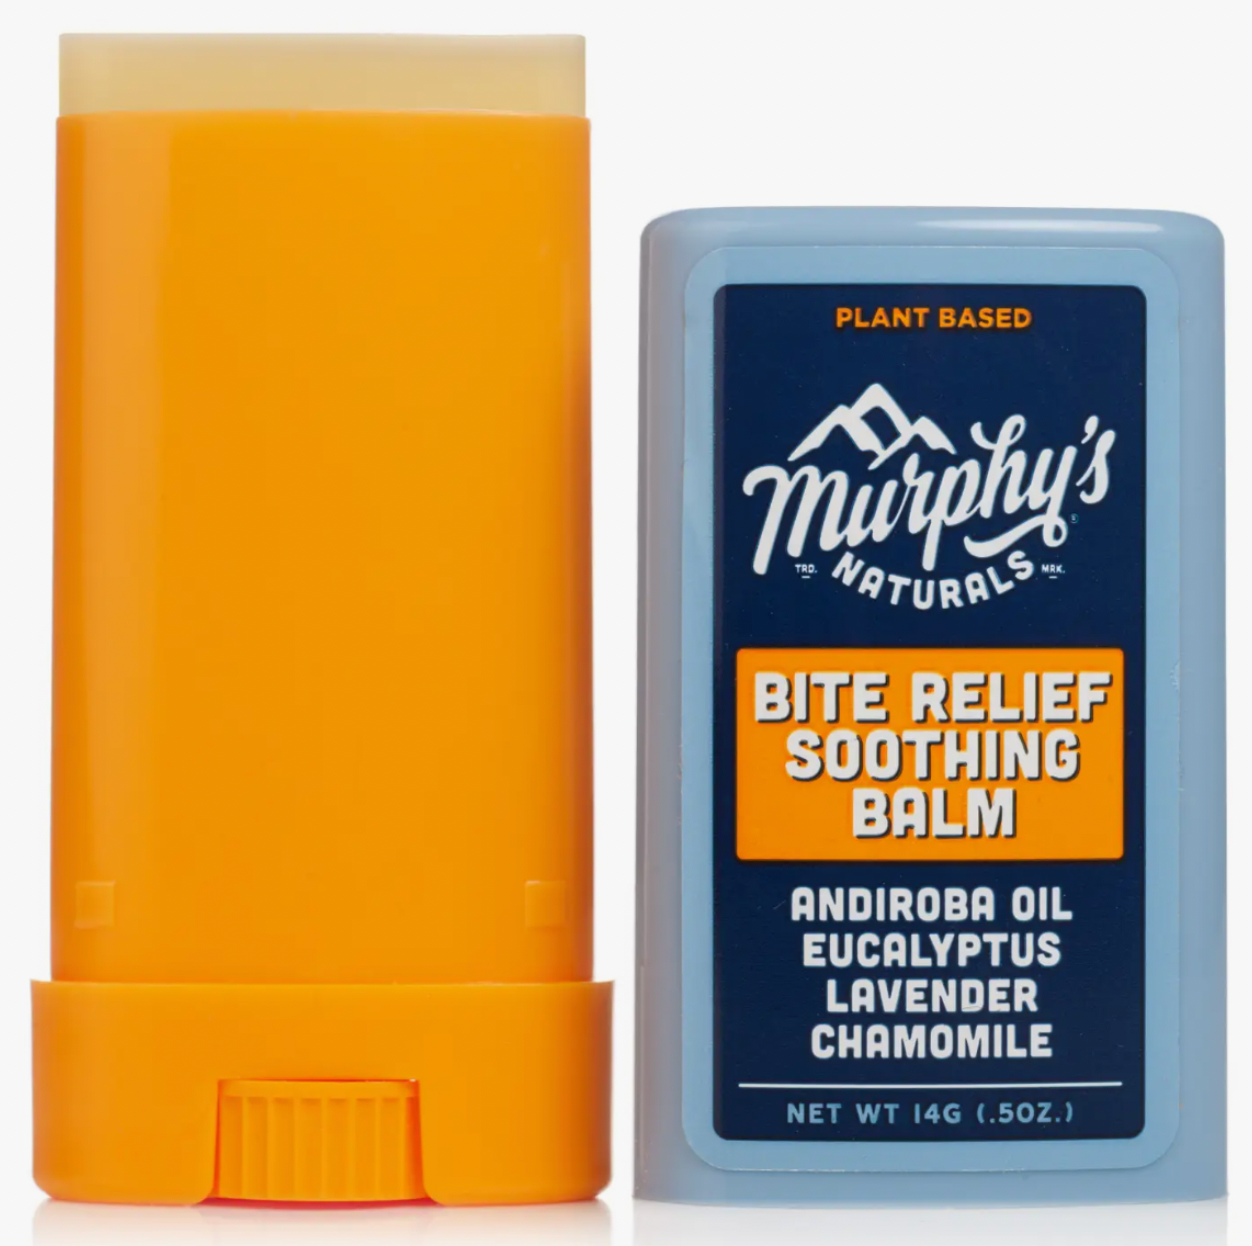 Bite Relief Soothing Balm Stick